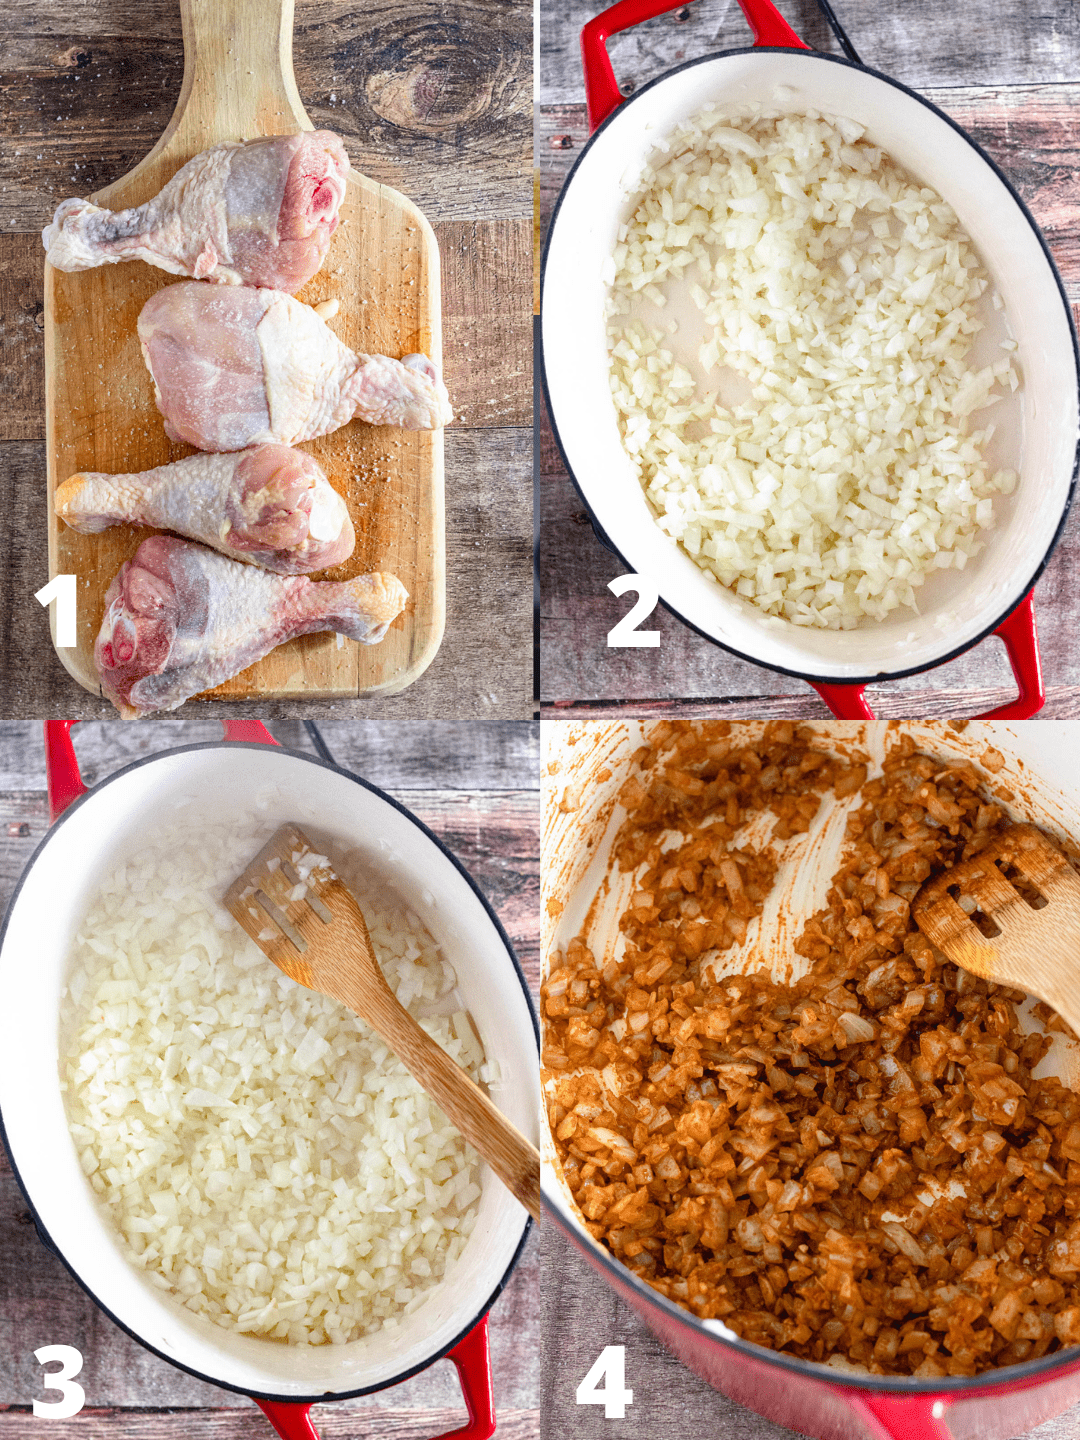 Steps 1-4 show how to season the bone-in chicken, saute the diced onions and incorporate the sweet paprika seasoning into the softened onions. 